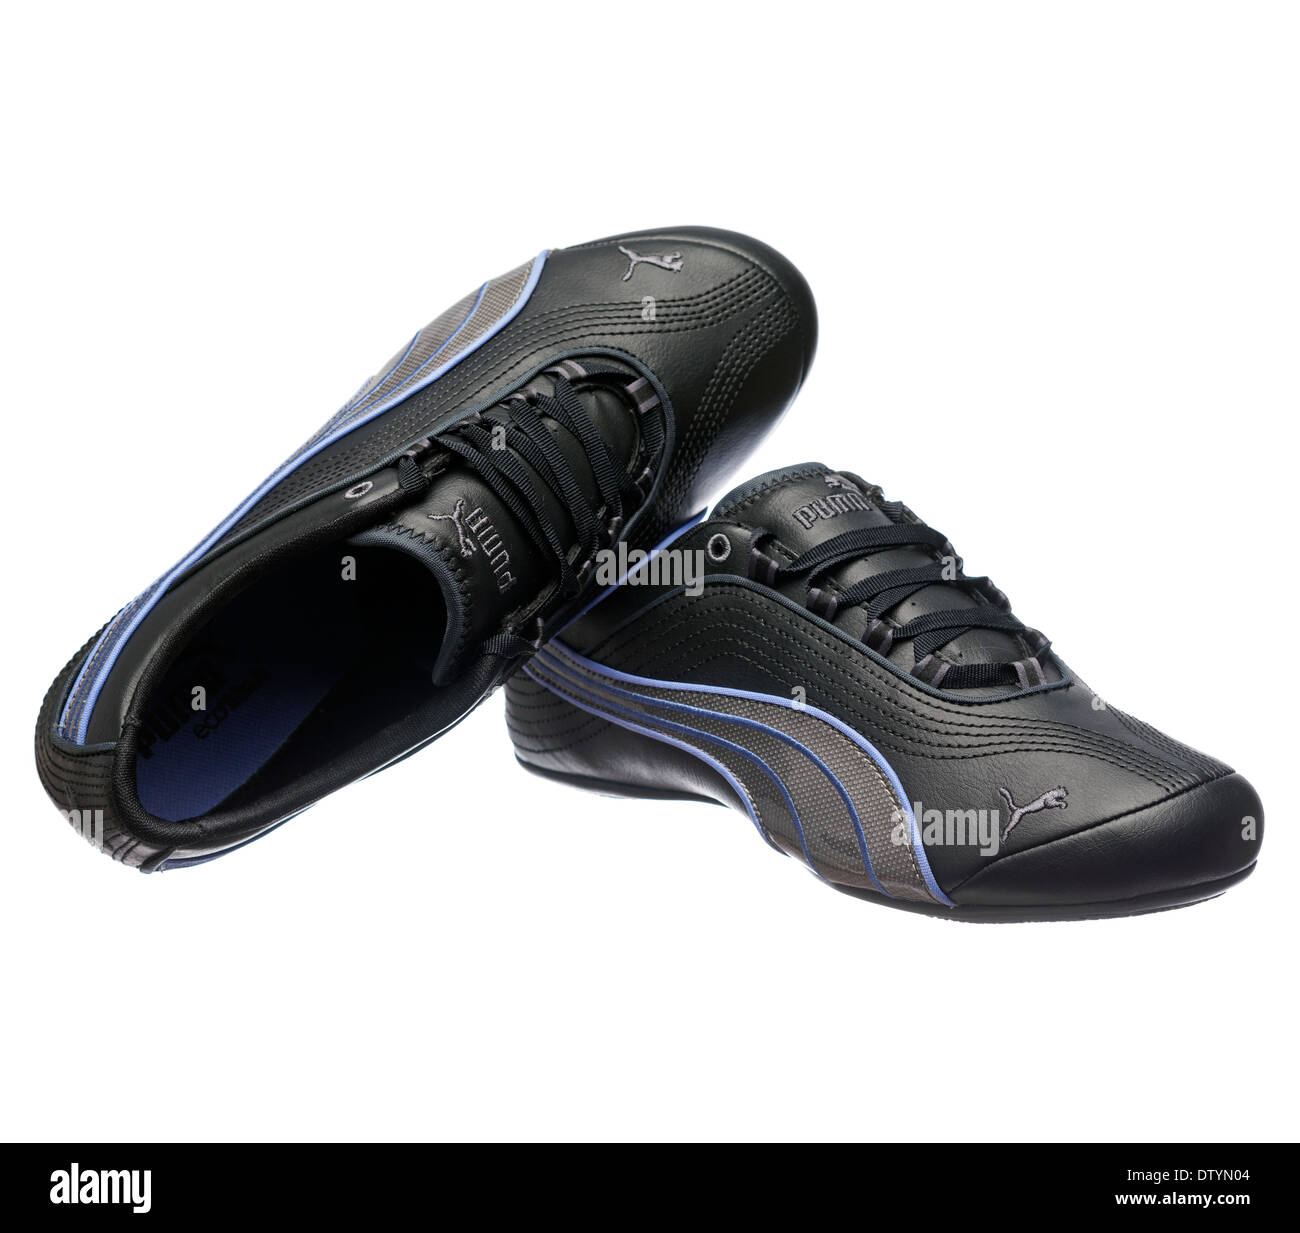 One pair of women's black leather Puma fitness shoes Stock Photo - Alamy